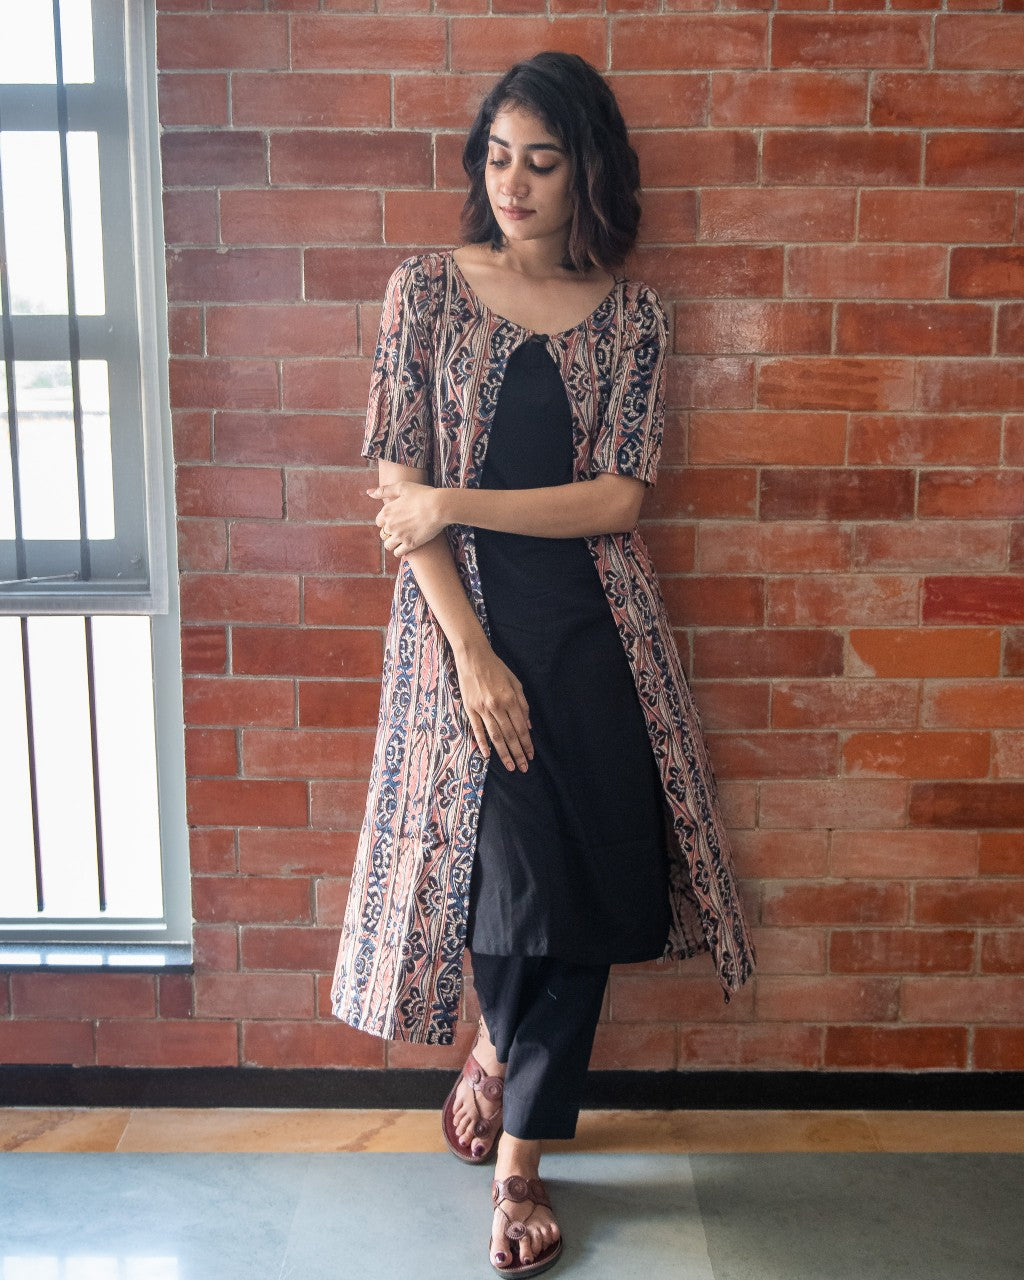 Kurtis + Jeans Outfits You Just Can't Miss! | Boho outfits, Indian designer  outfits, Casual indian fashion